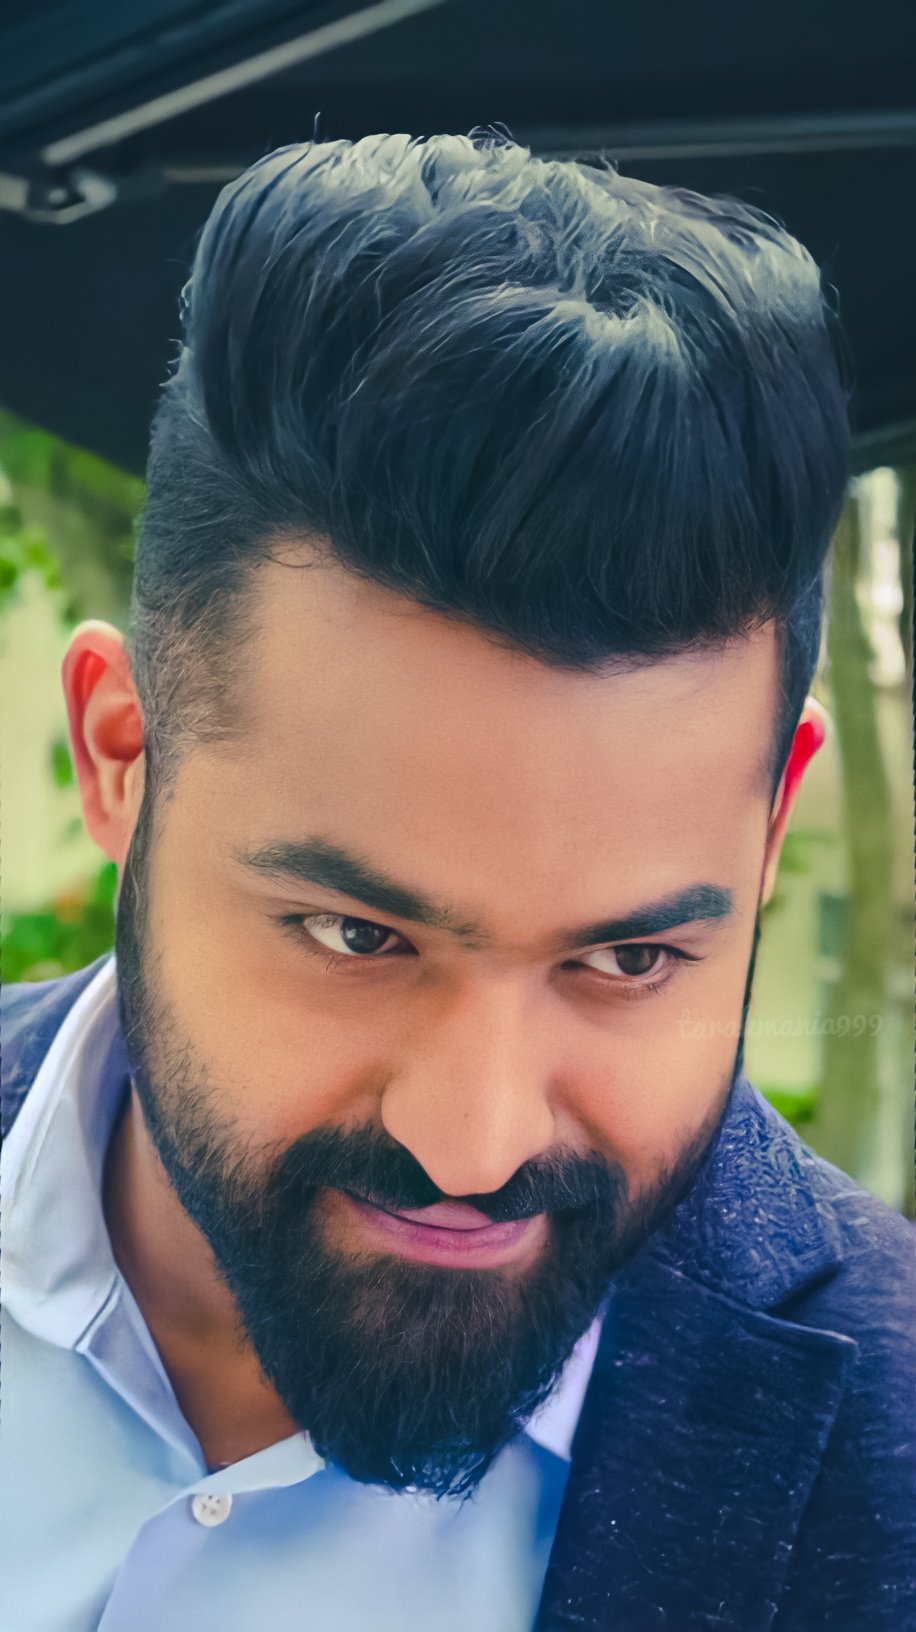 Jr NTR Actor HD photos,images,pics,stills and picture-indiglamour.com  #149434